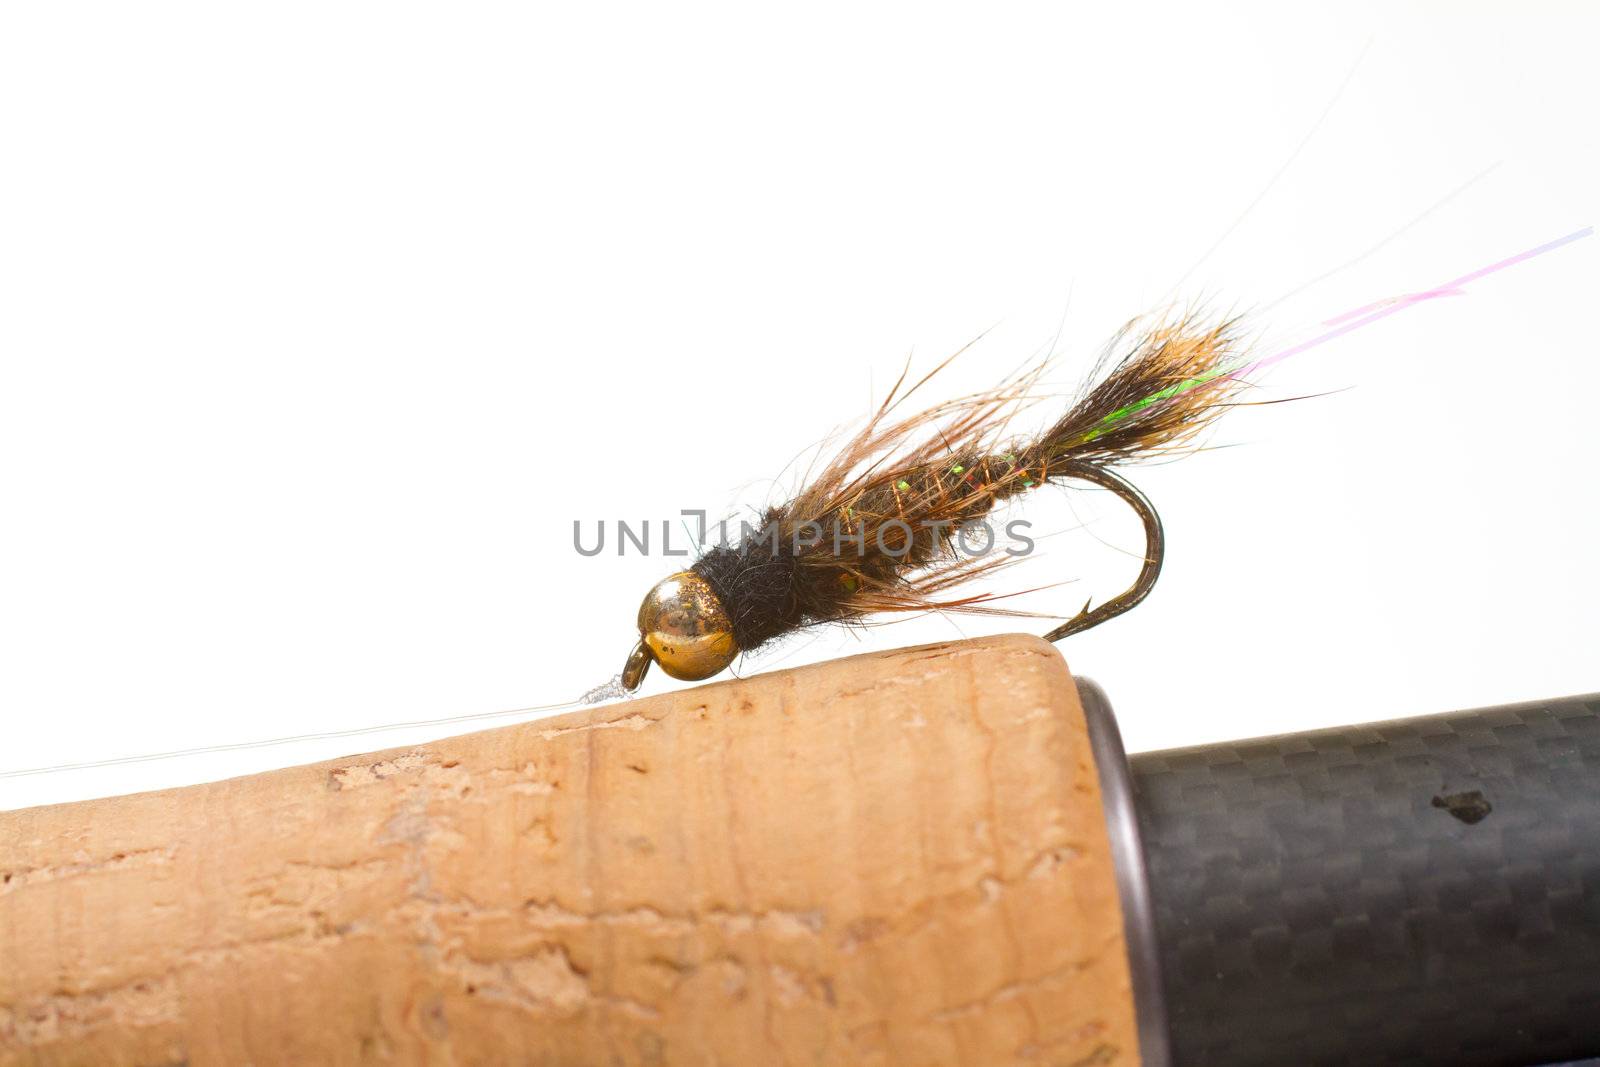 This big fly fishing fly is isolated on a cork handle in the studio for a detail fly fishing color image.